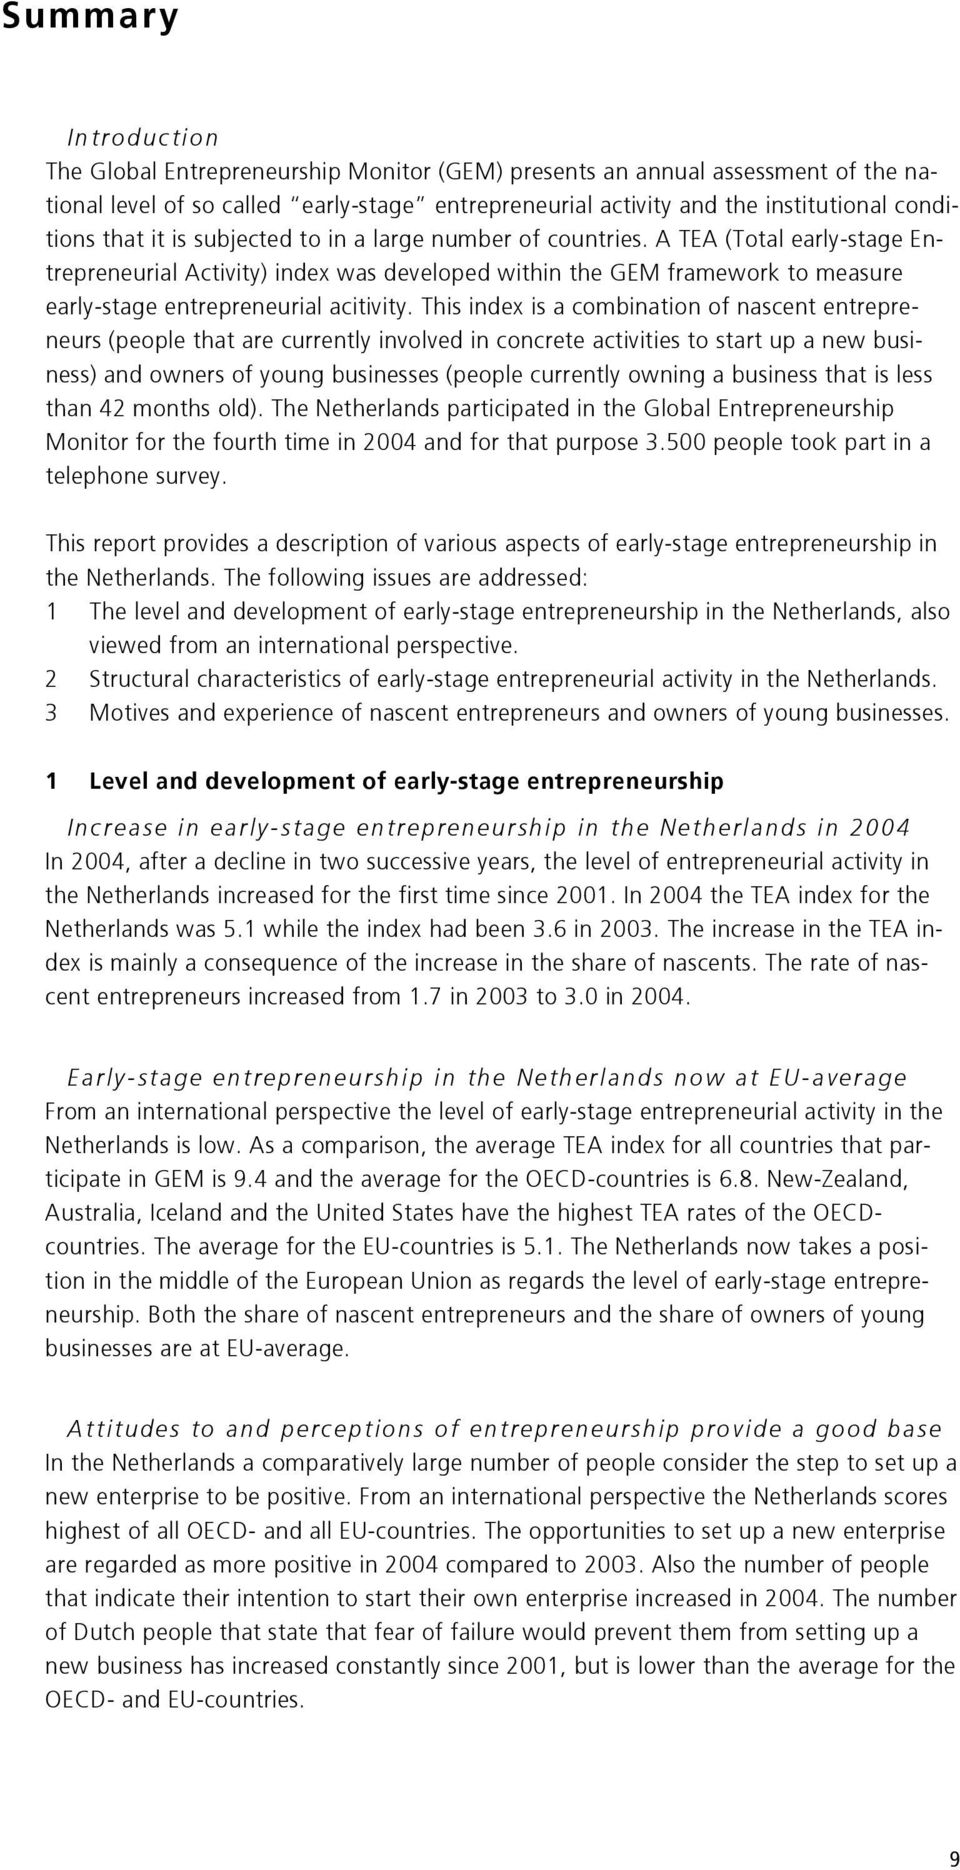 A TEA (Total early-stage Entrepreneurial Activity) index was developed within the GEM framework to measure early-stage entrepreneurial acitivity.